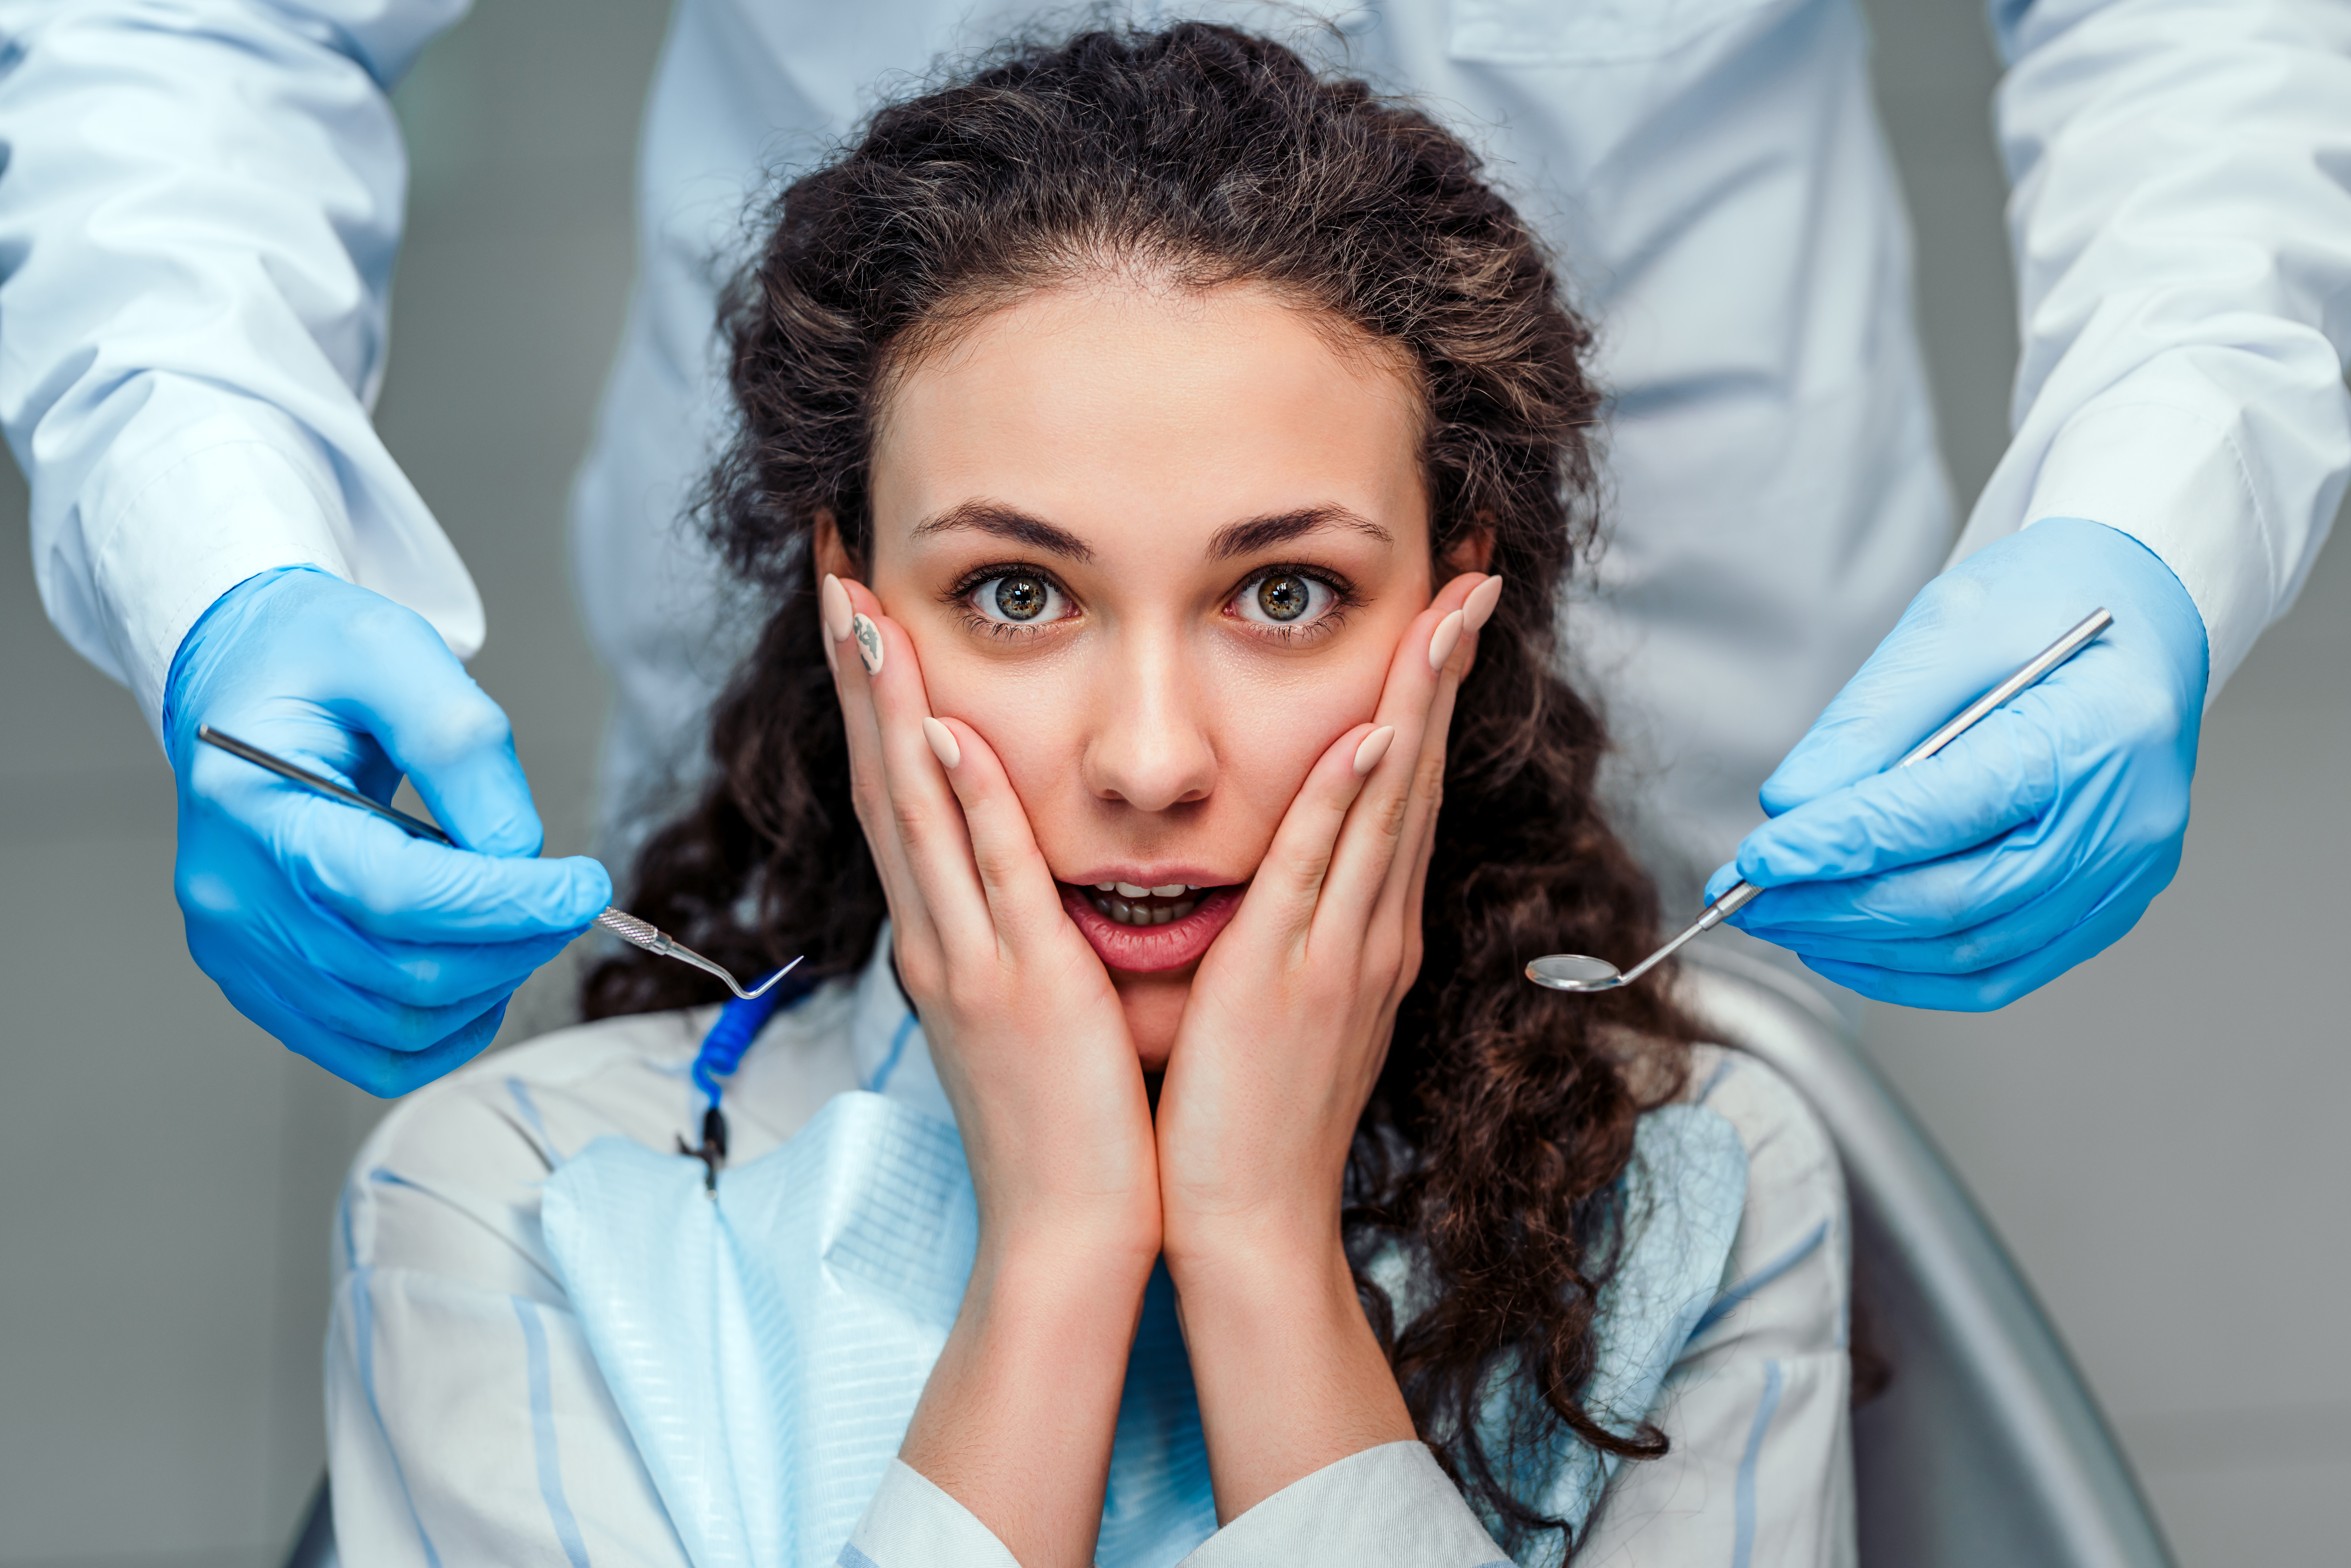 Dental Exam Anxiety: Tips for Overcoming Fear of the Dentist